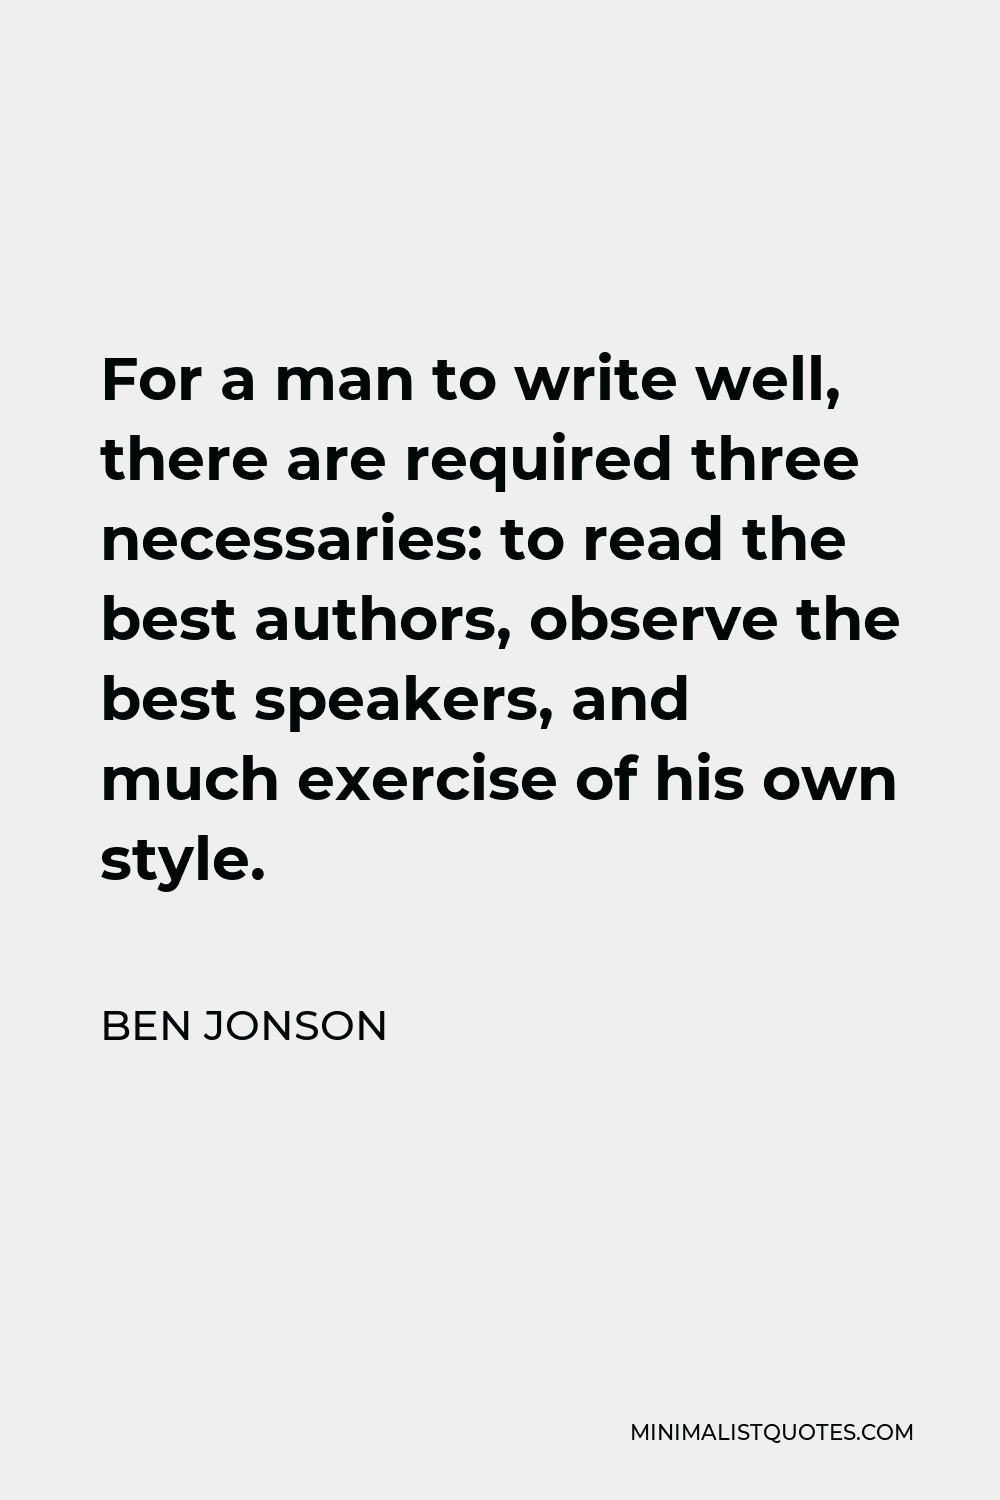 Ben Jonson Quote - For a man to write well, there are required three necessaries: to read the best authors, observe the best speakers, and much exercise of his own style.